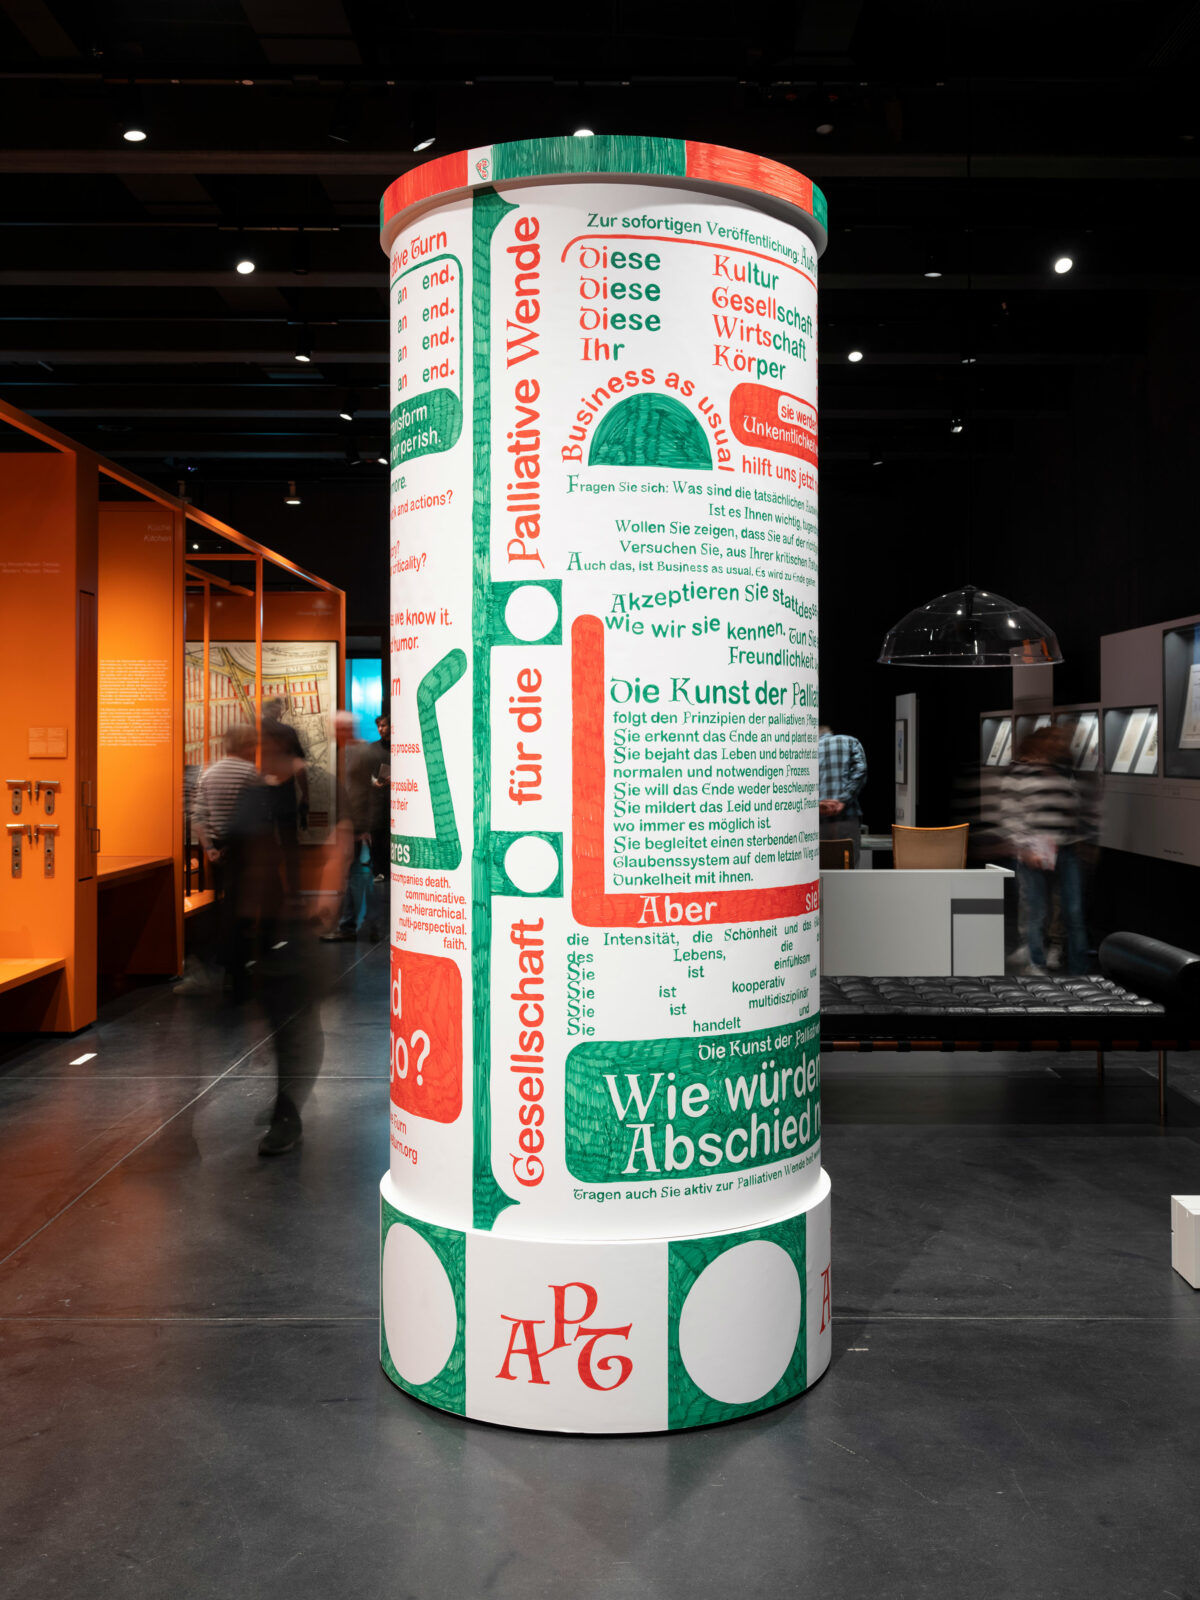 An original large advertising pillar stands in the centre of the exhibition area. It is labelled with small and large APT messages in green and red lettering from top to bottom.